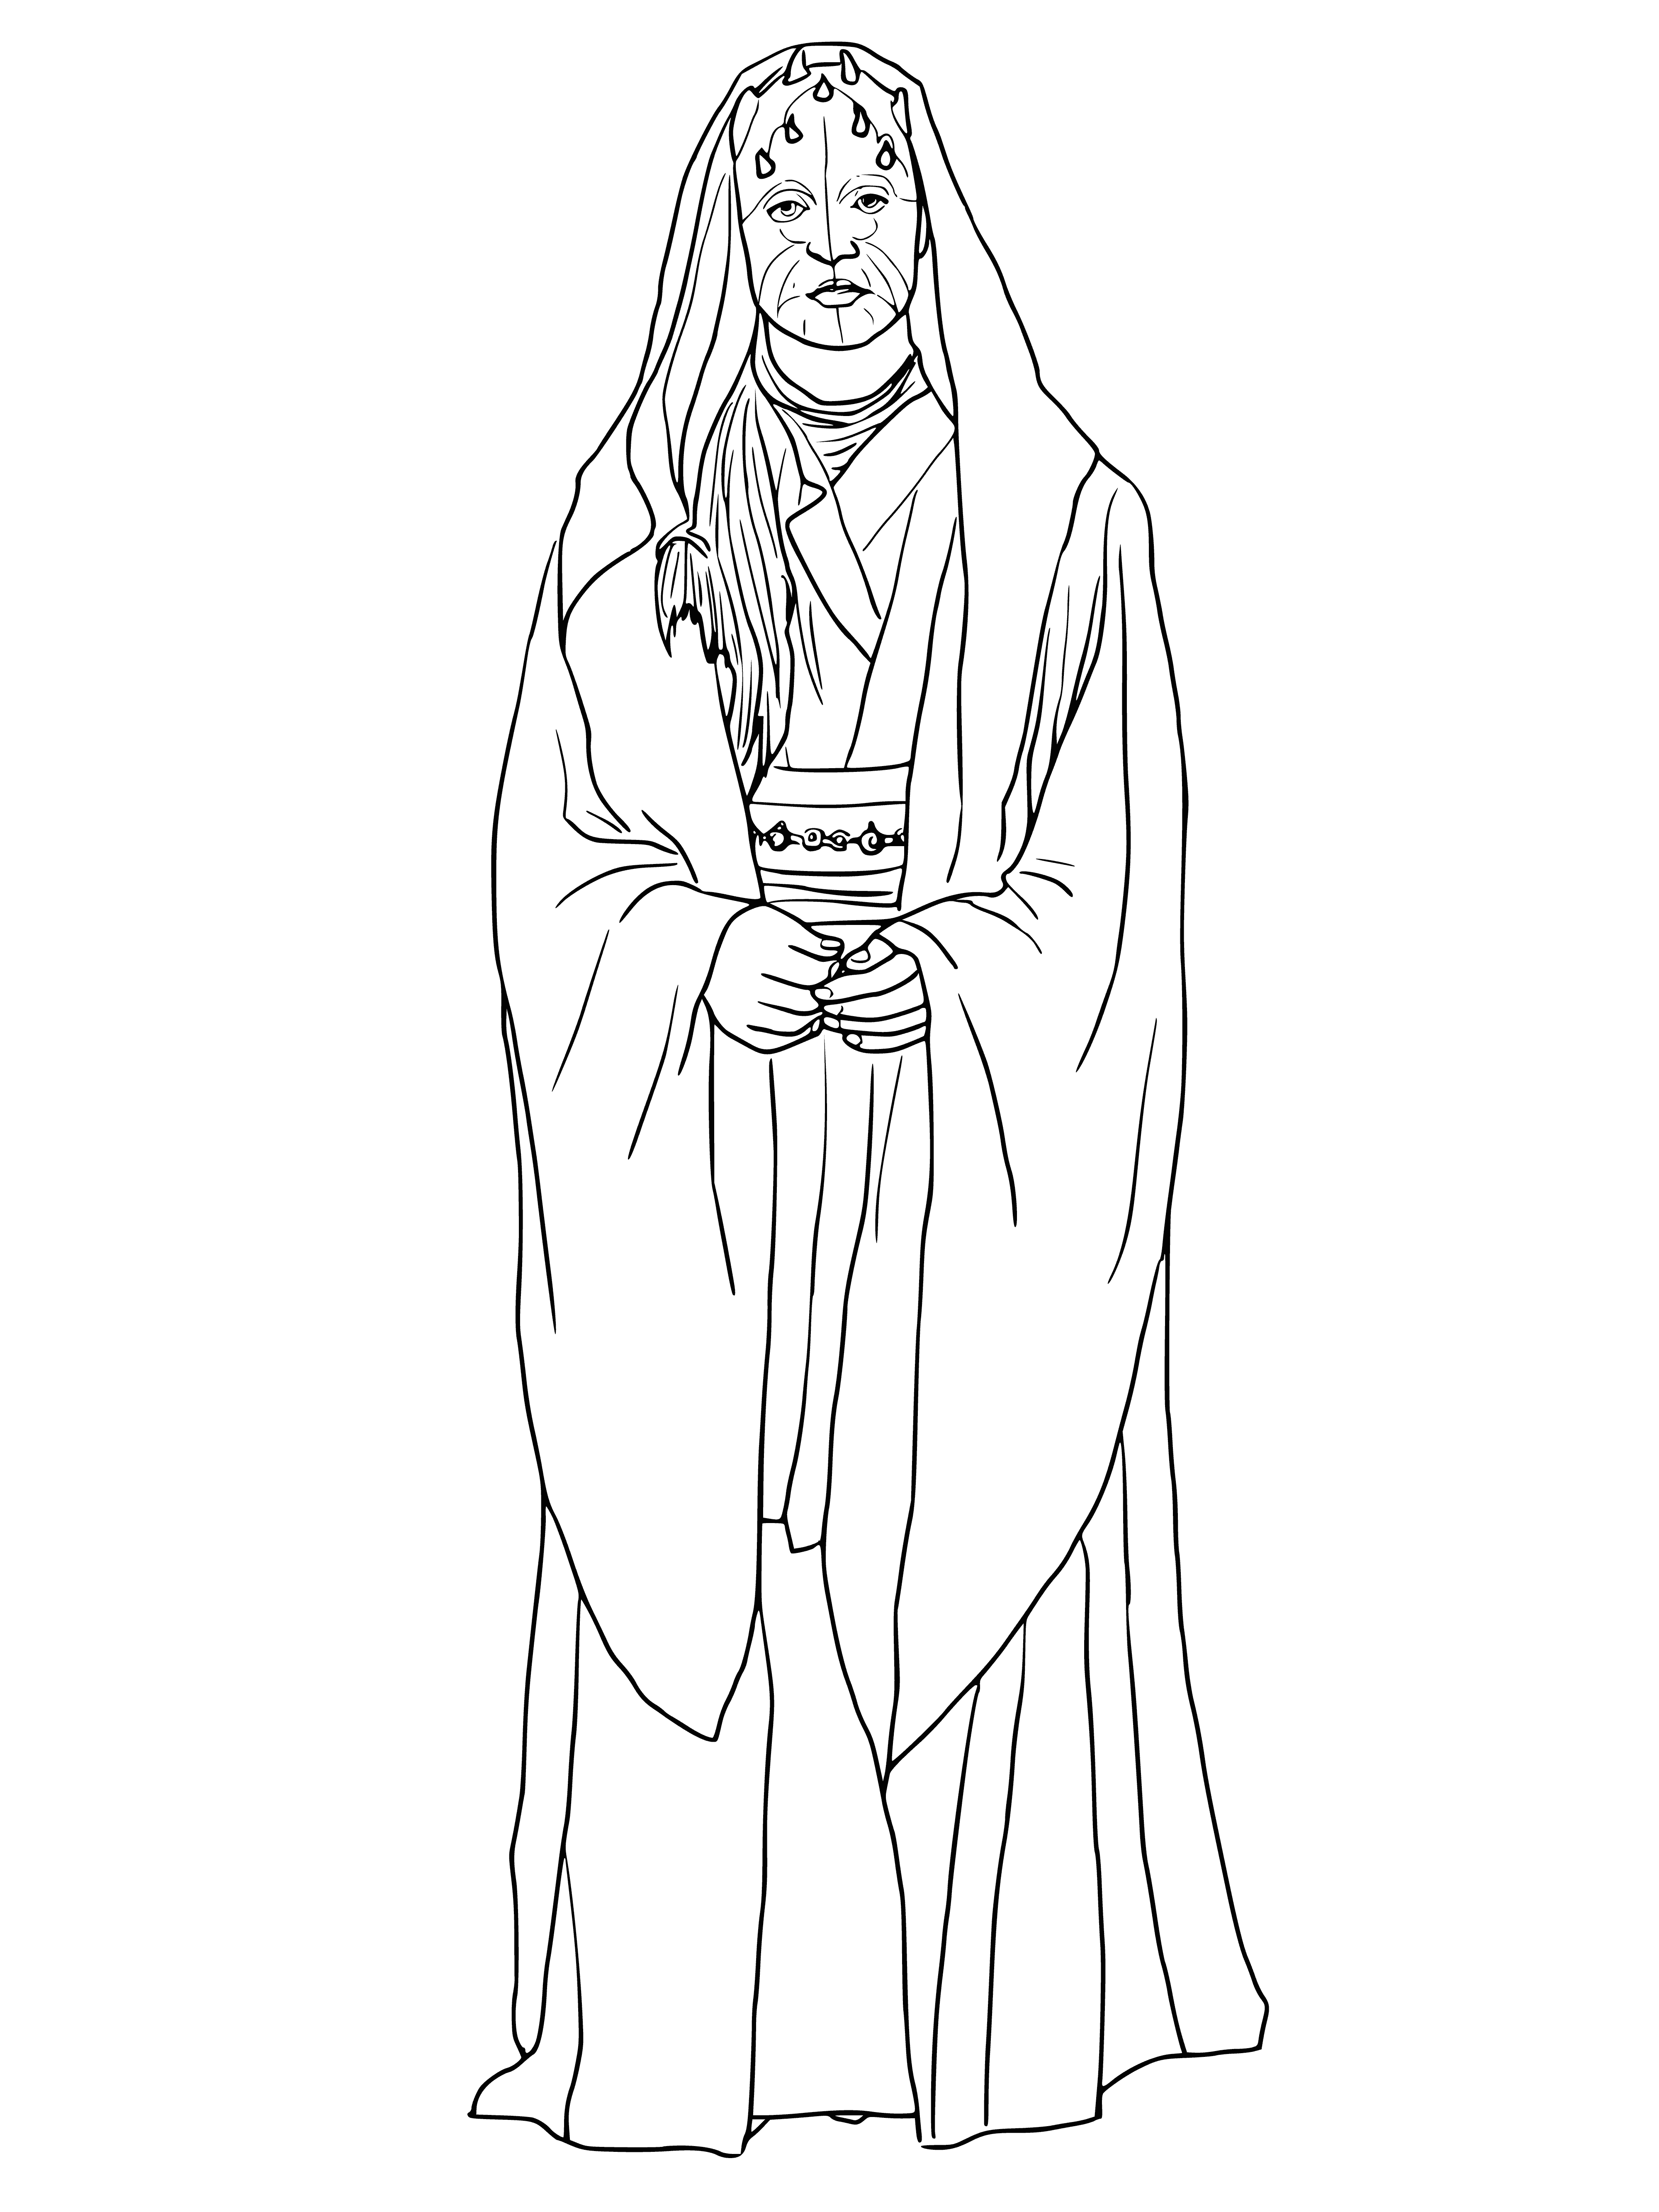 Jedi Master Iit Cat coloring page